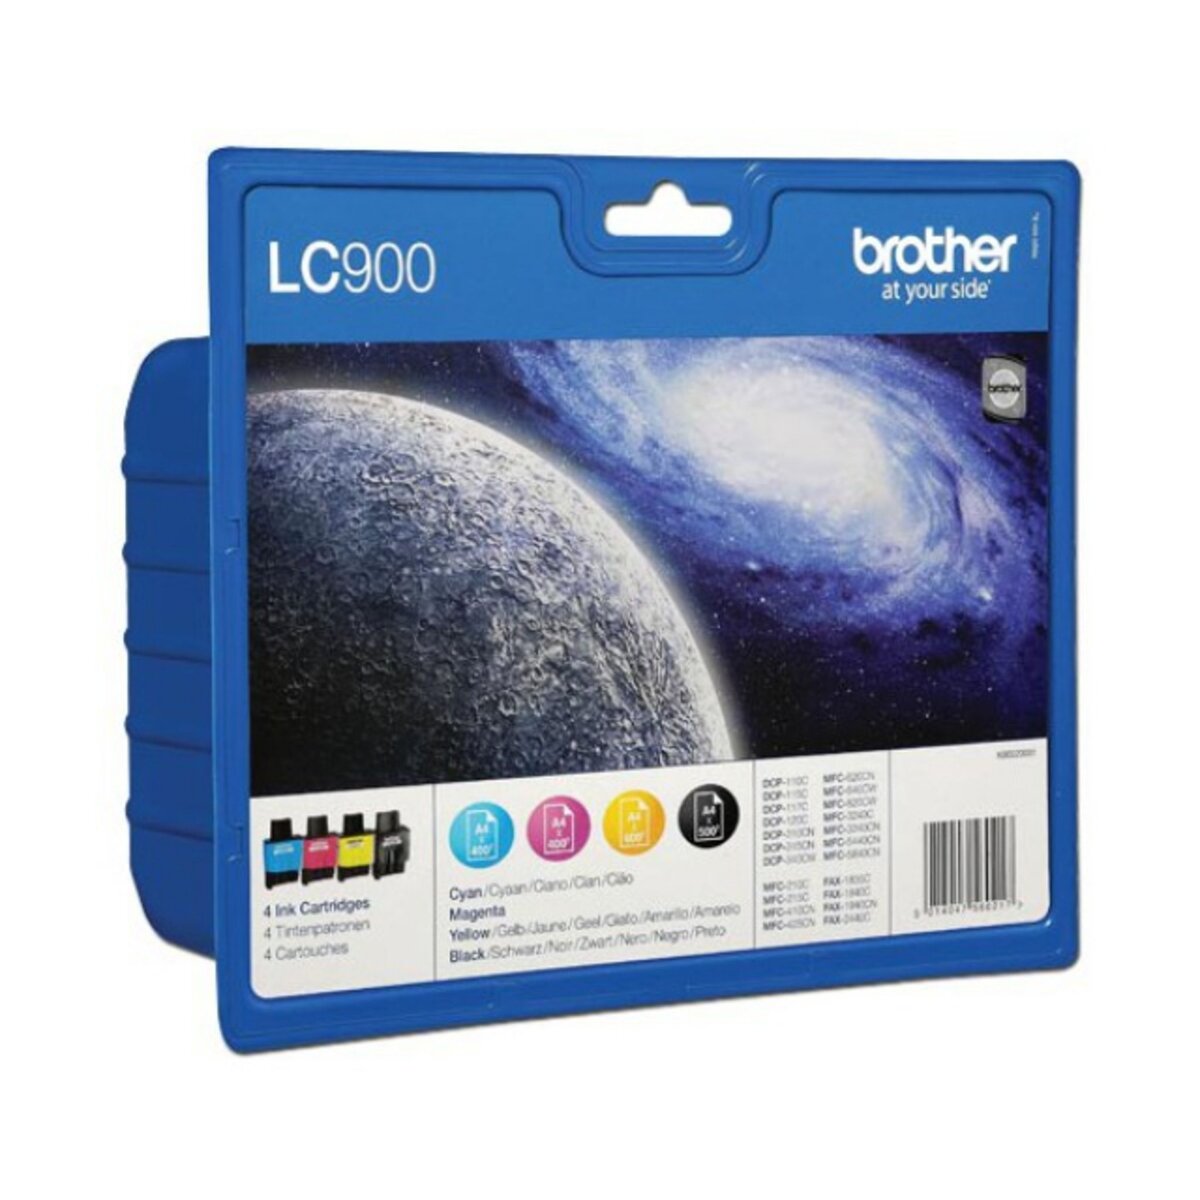 BROTHER Cartouches d'encre LC900 NCMJ BLISTER